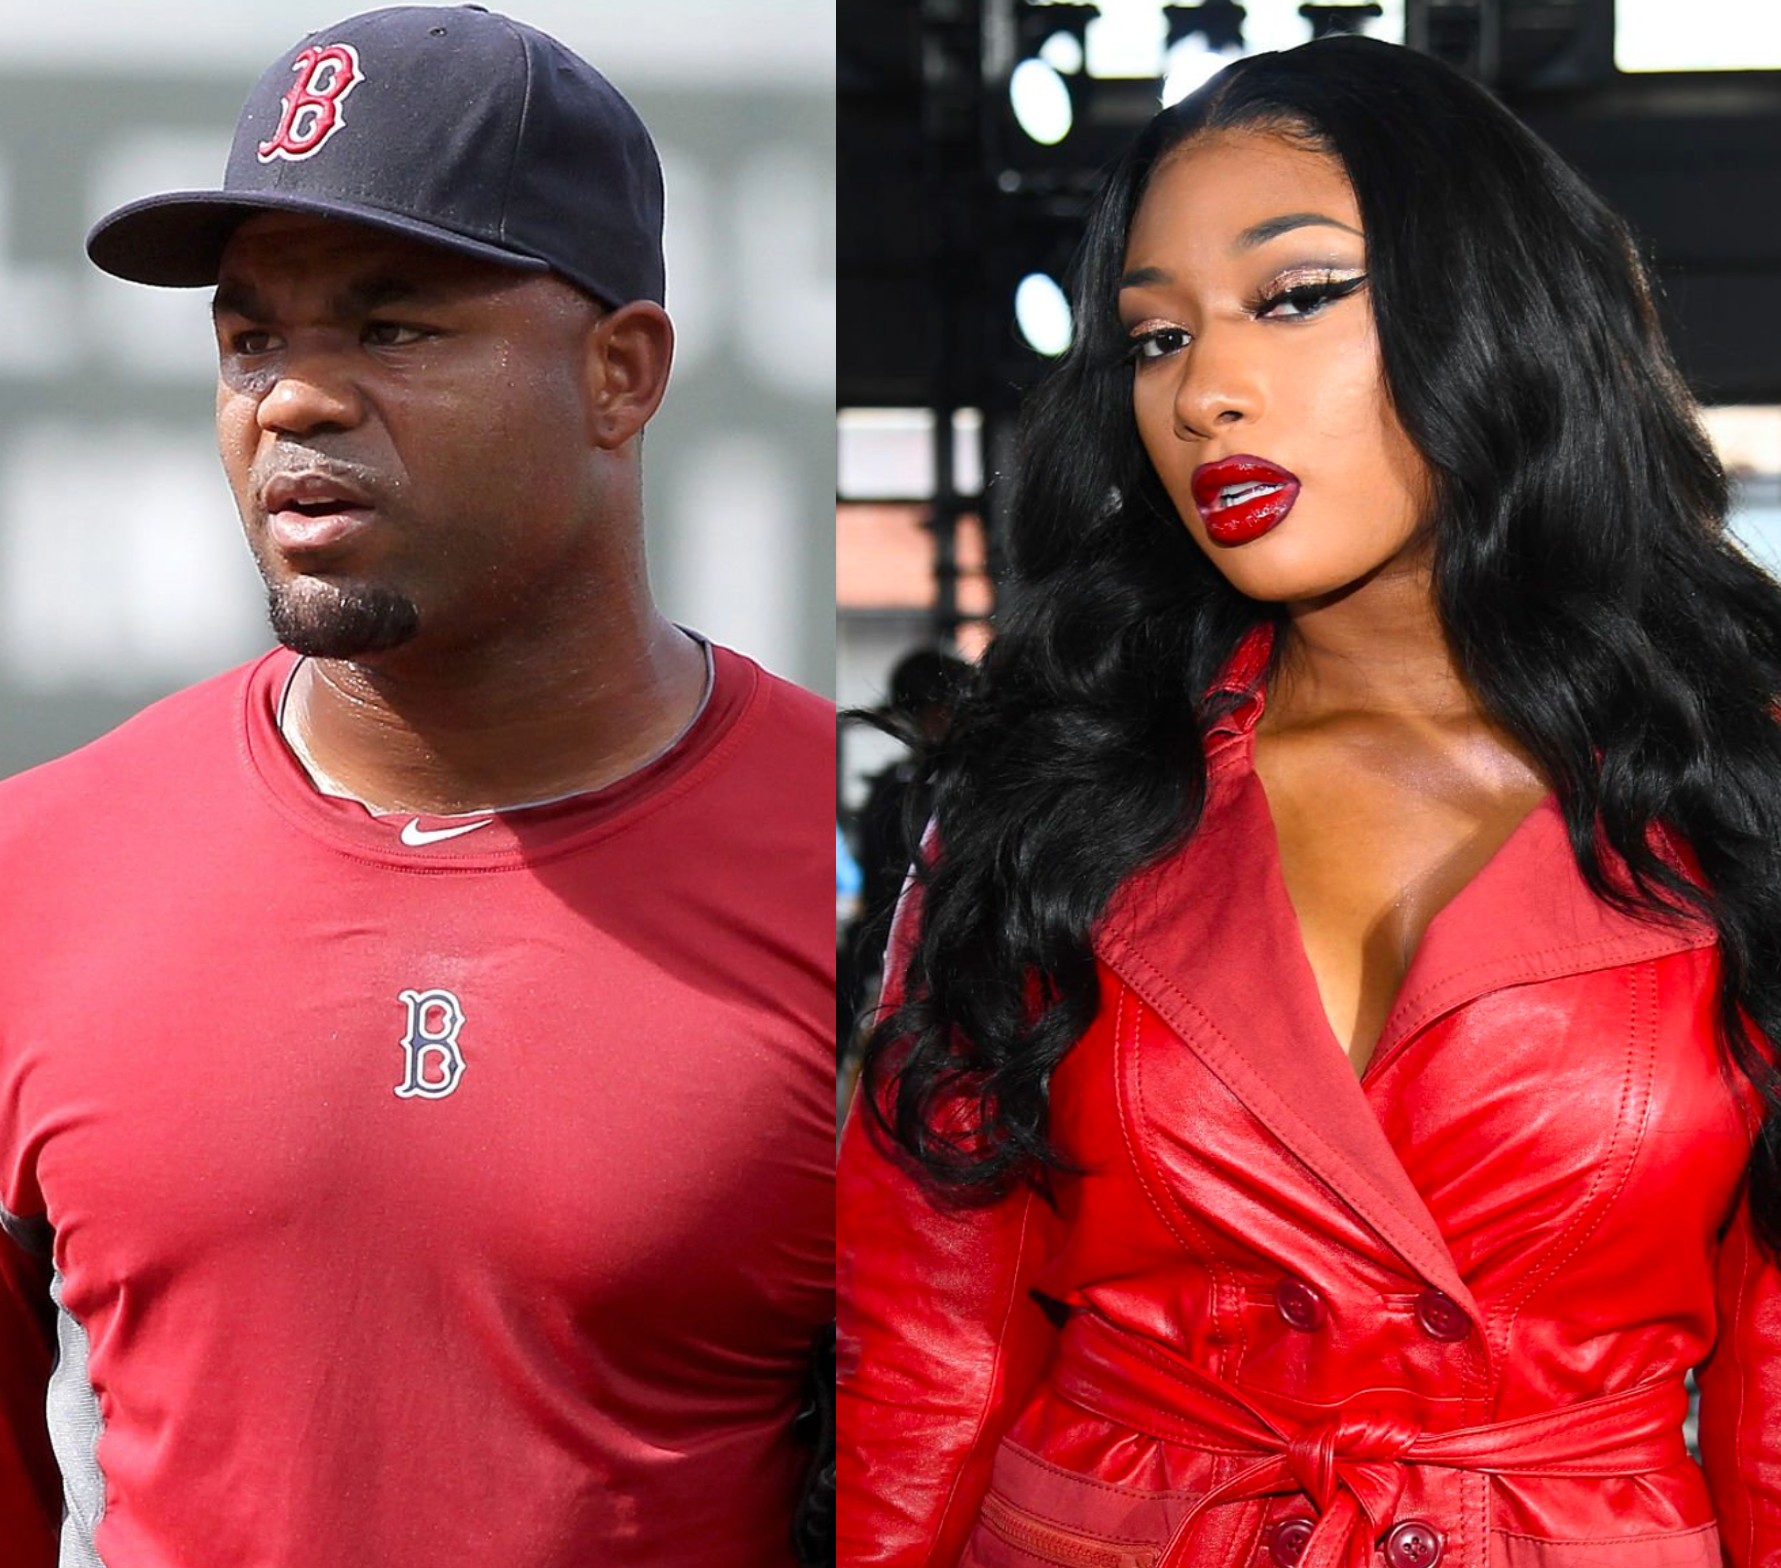 Carl Crawford Continues To Antagonize Megan Thee Stallion Over San